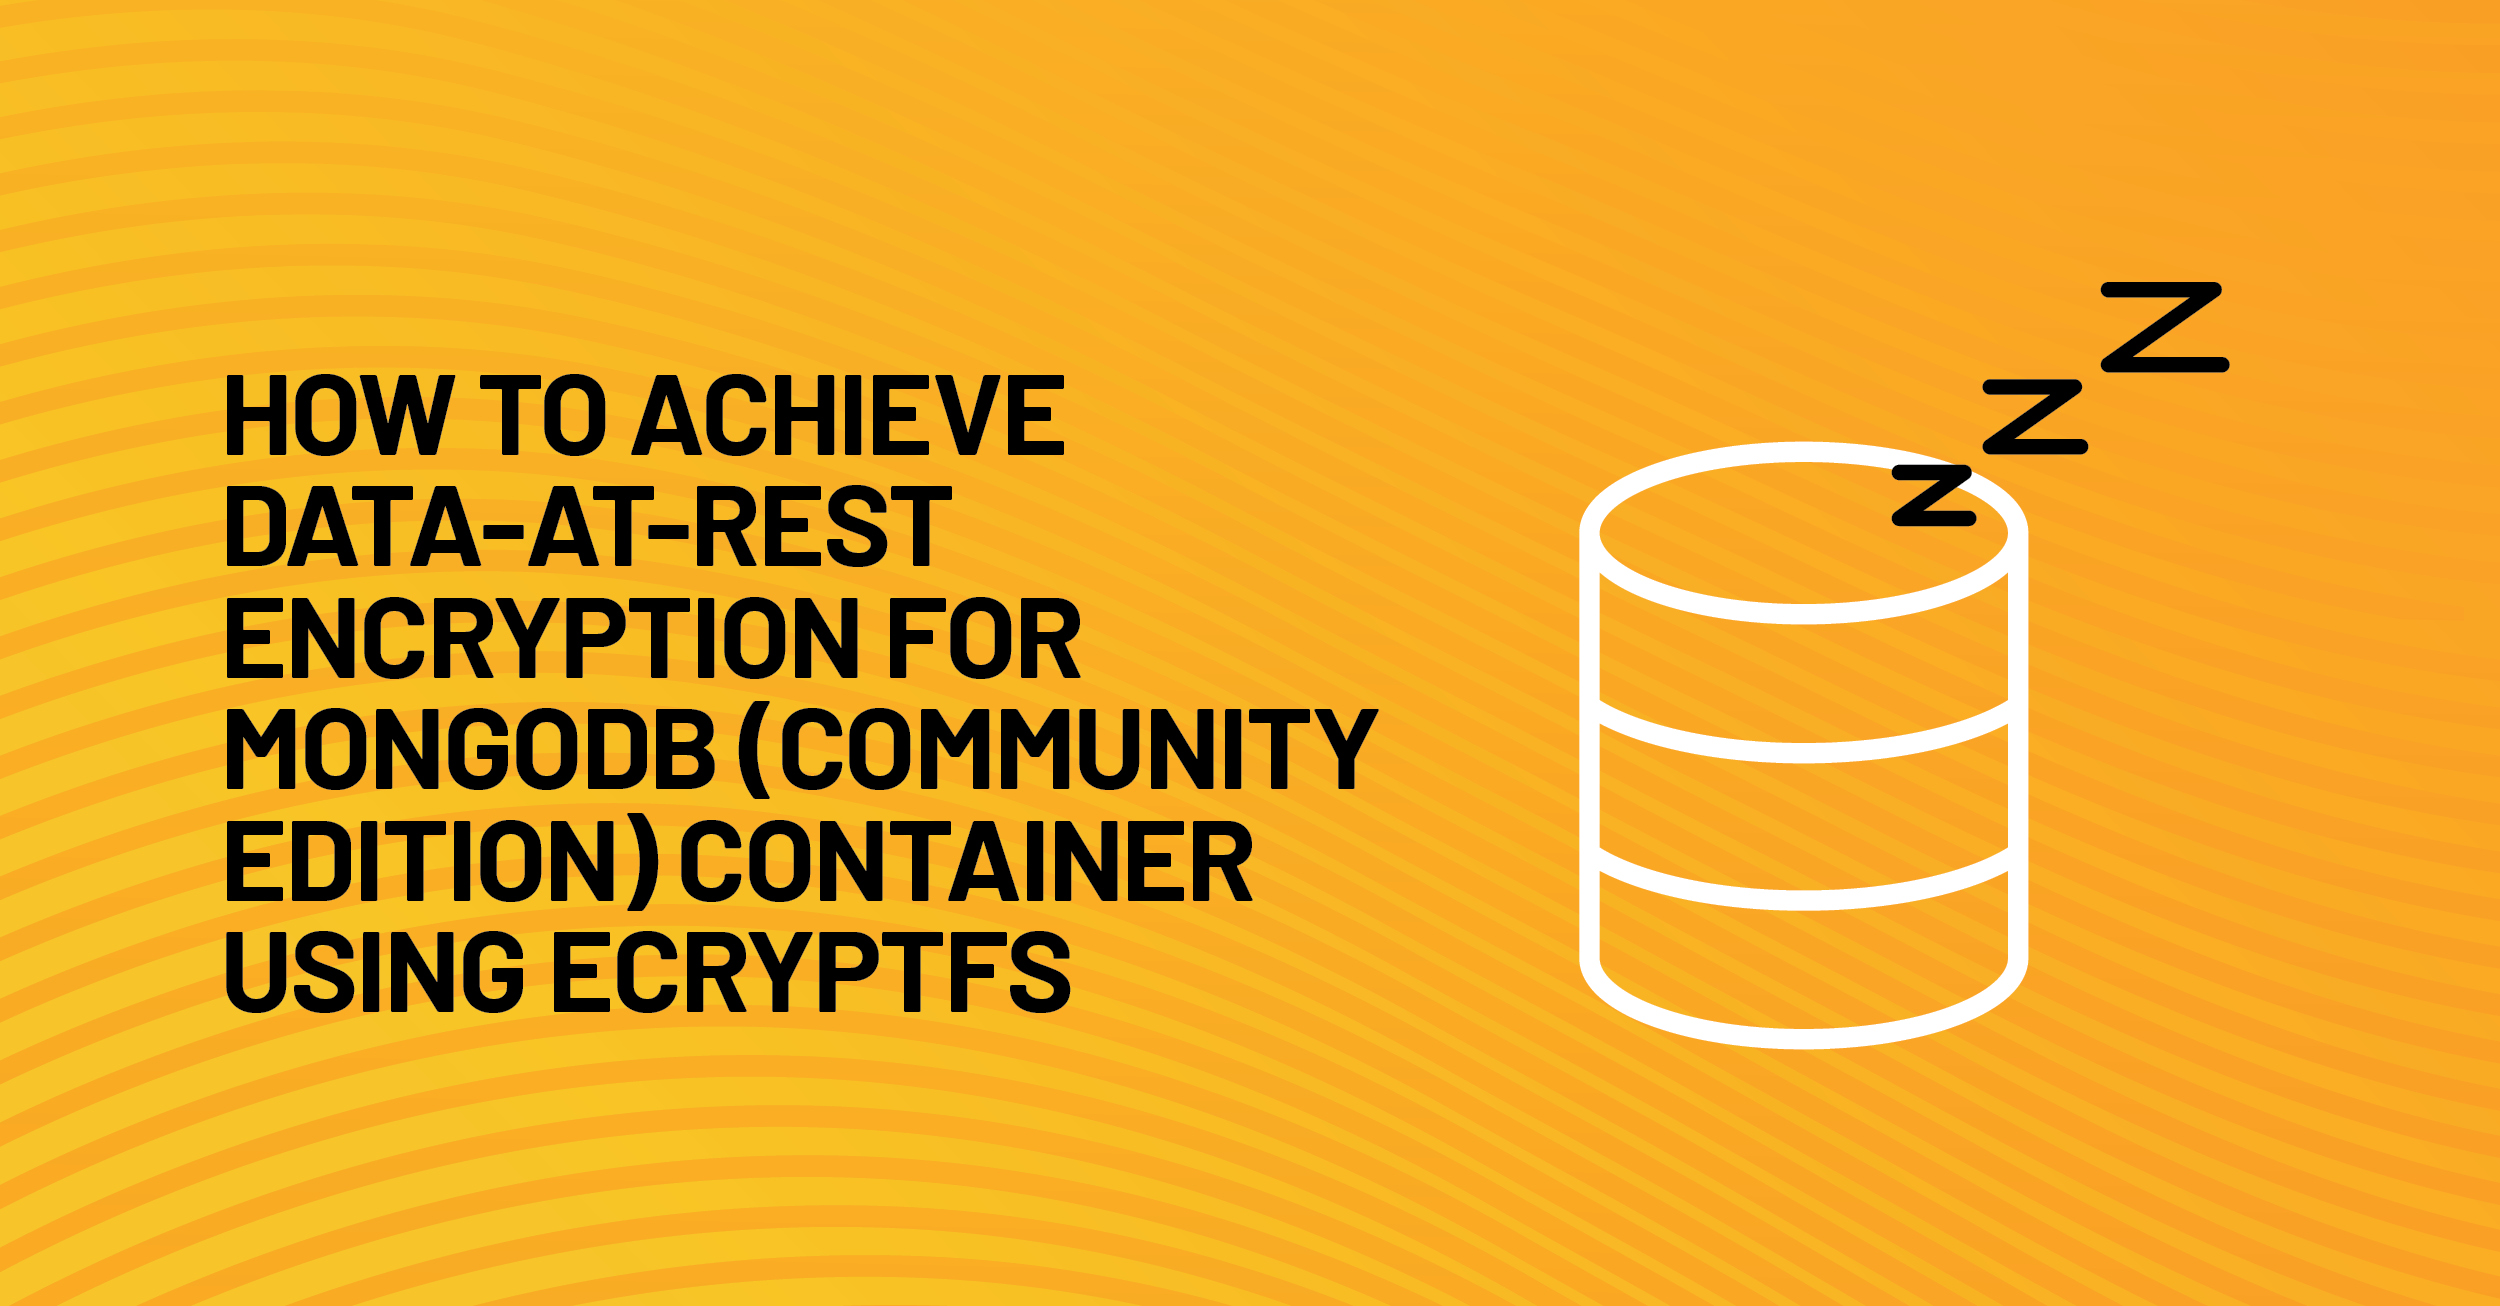 How to achieve data-at-rest encryption for MongoDB (Community Edition) container using eCryptfs